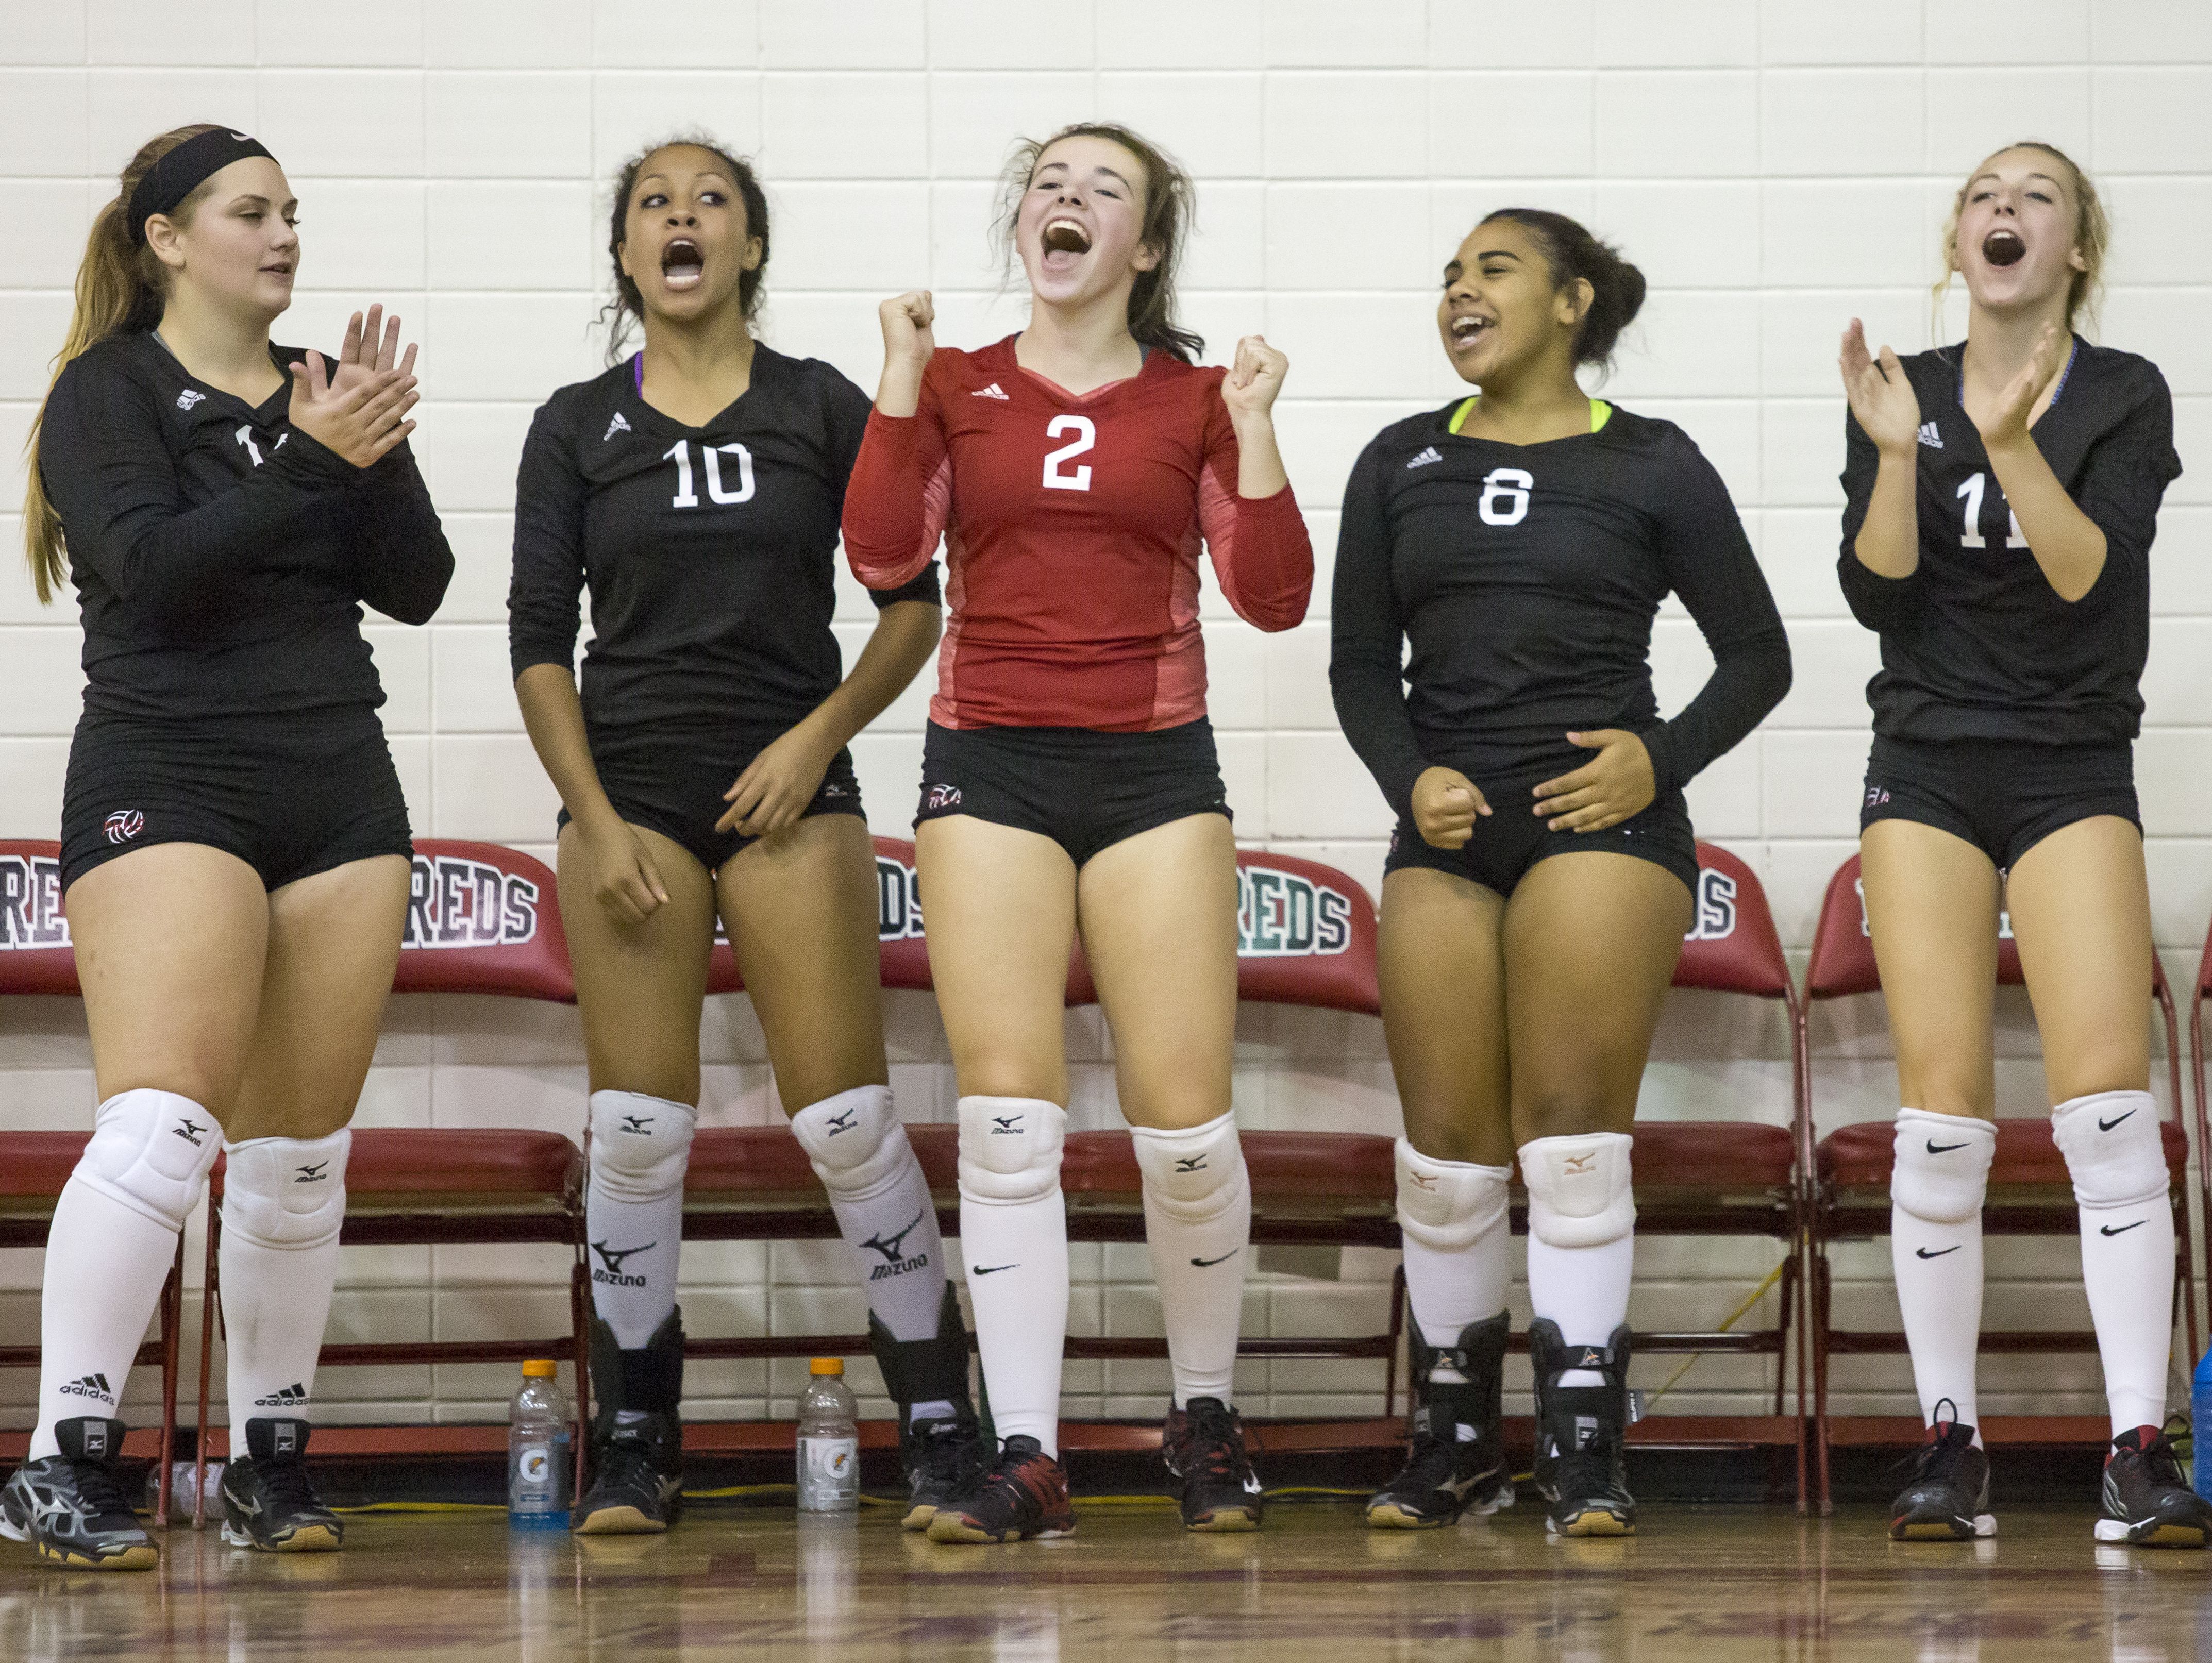 Port Huron players celebrate on the bench during a volleyball game at Port Huron High School.